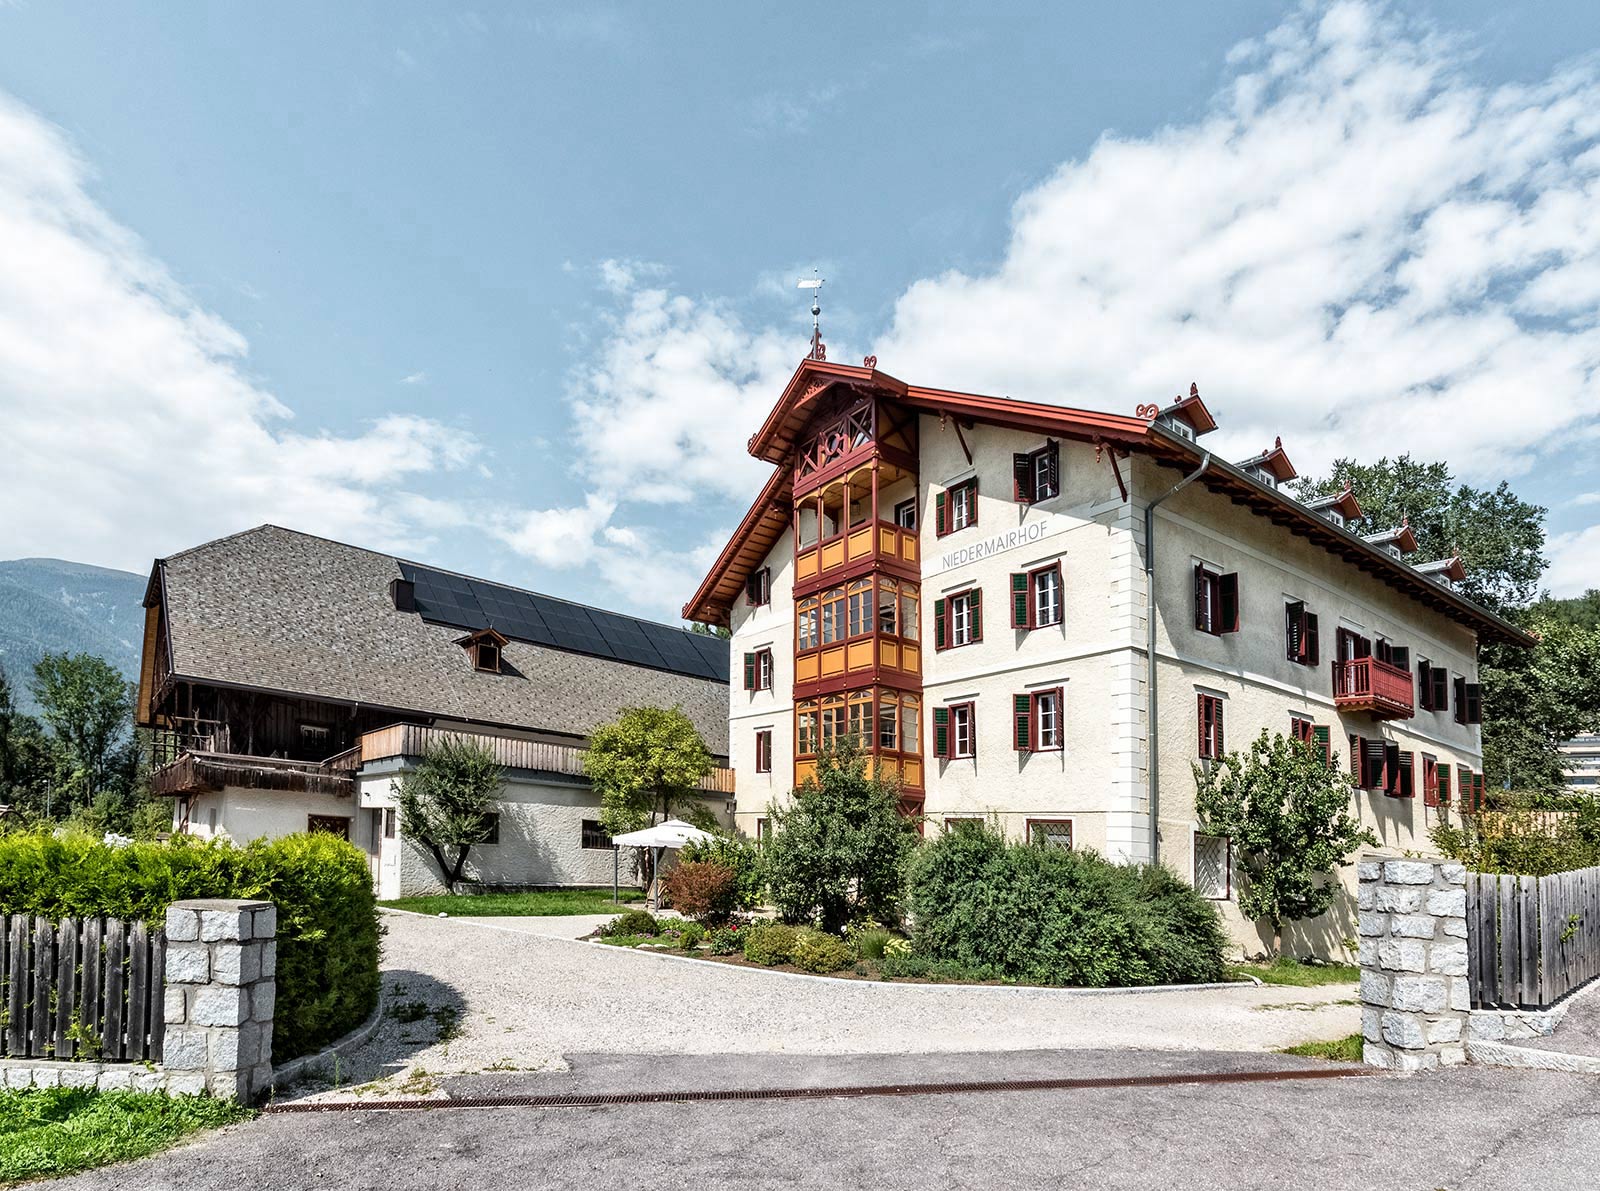 Pretty Hotels: The most beautiful hotels in South Tyrol (Image 11)